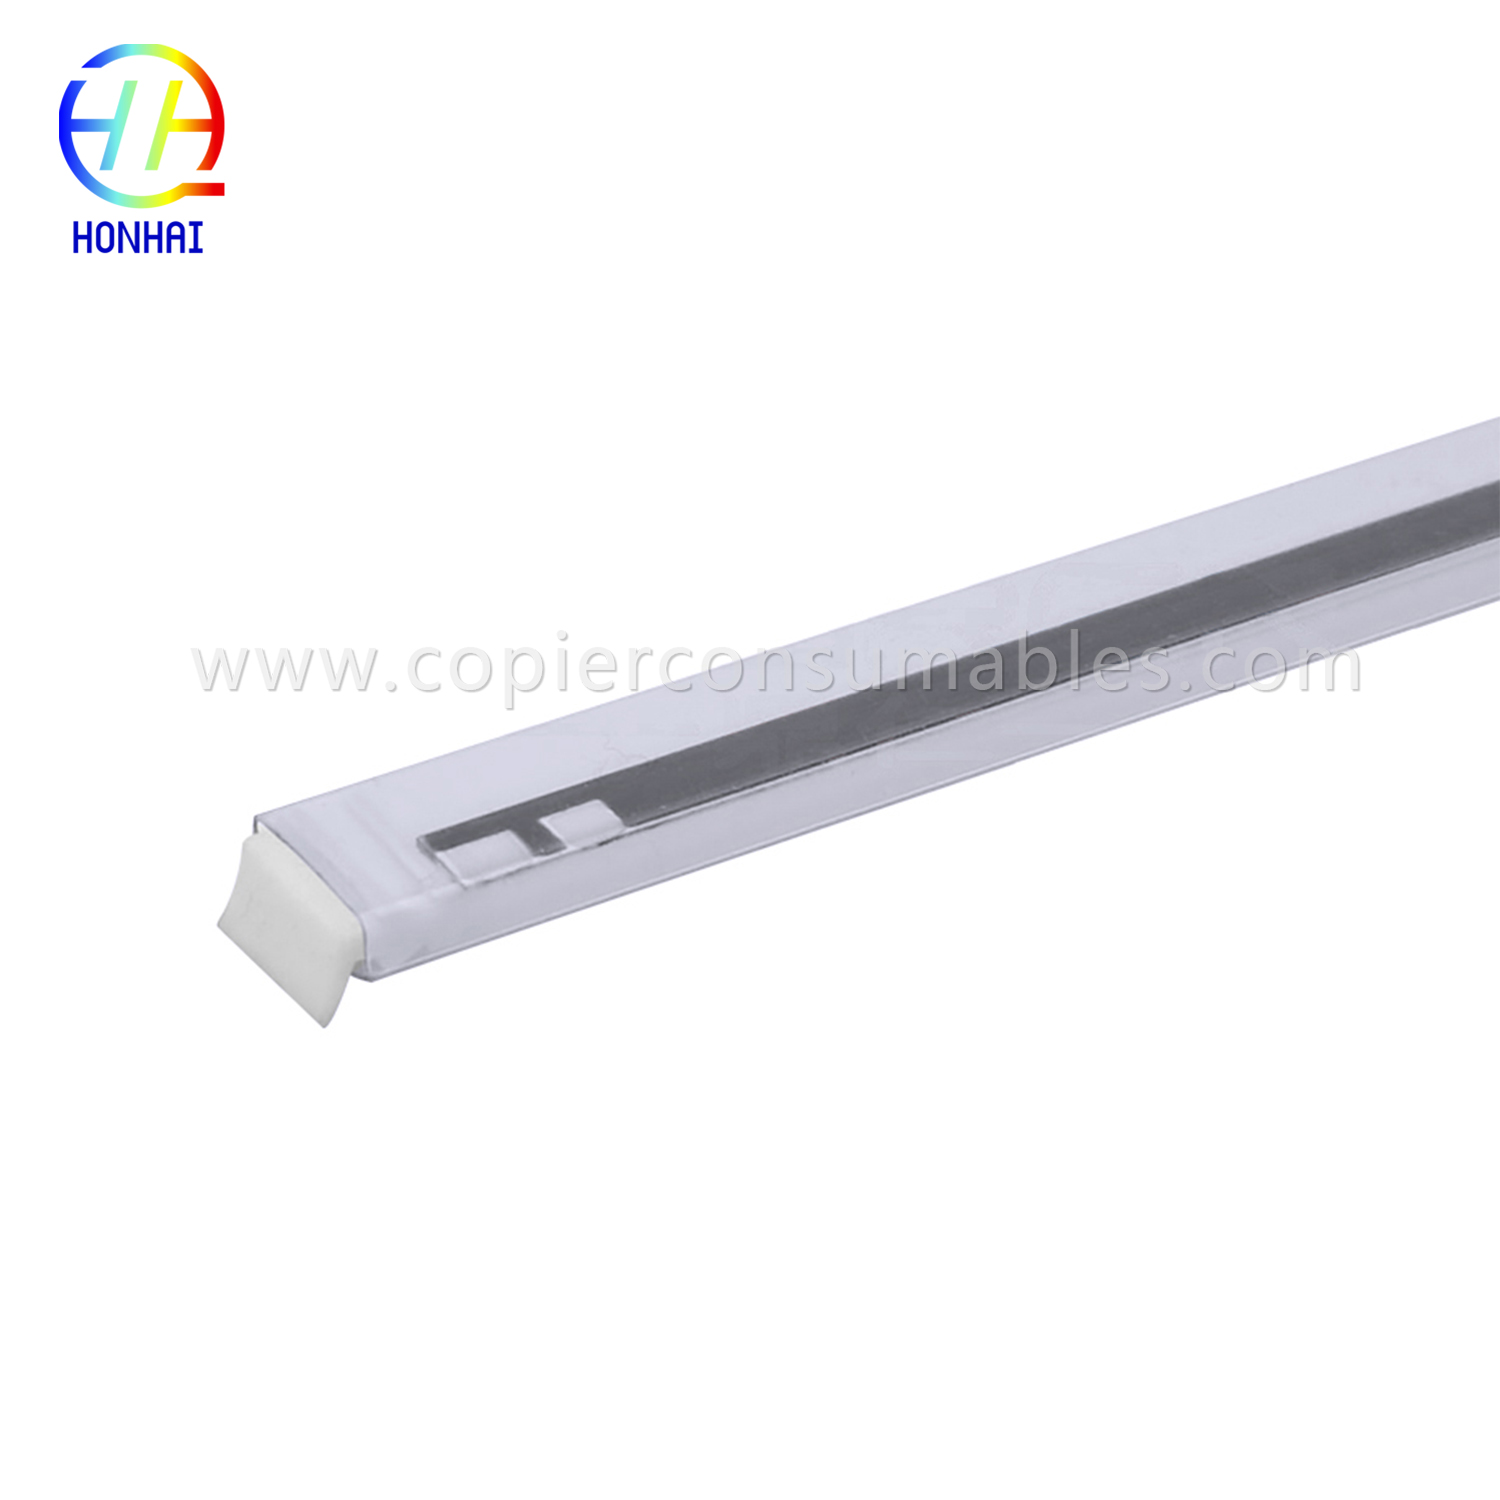 Ceramic Heating Element for HP Laserjet P1005 P1006 P1008 (RM1-4007-HE RM1-4008-HE) (1)